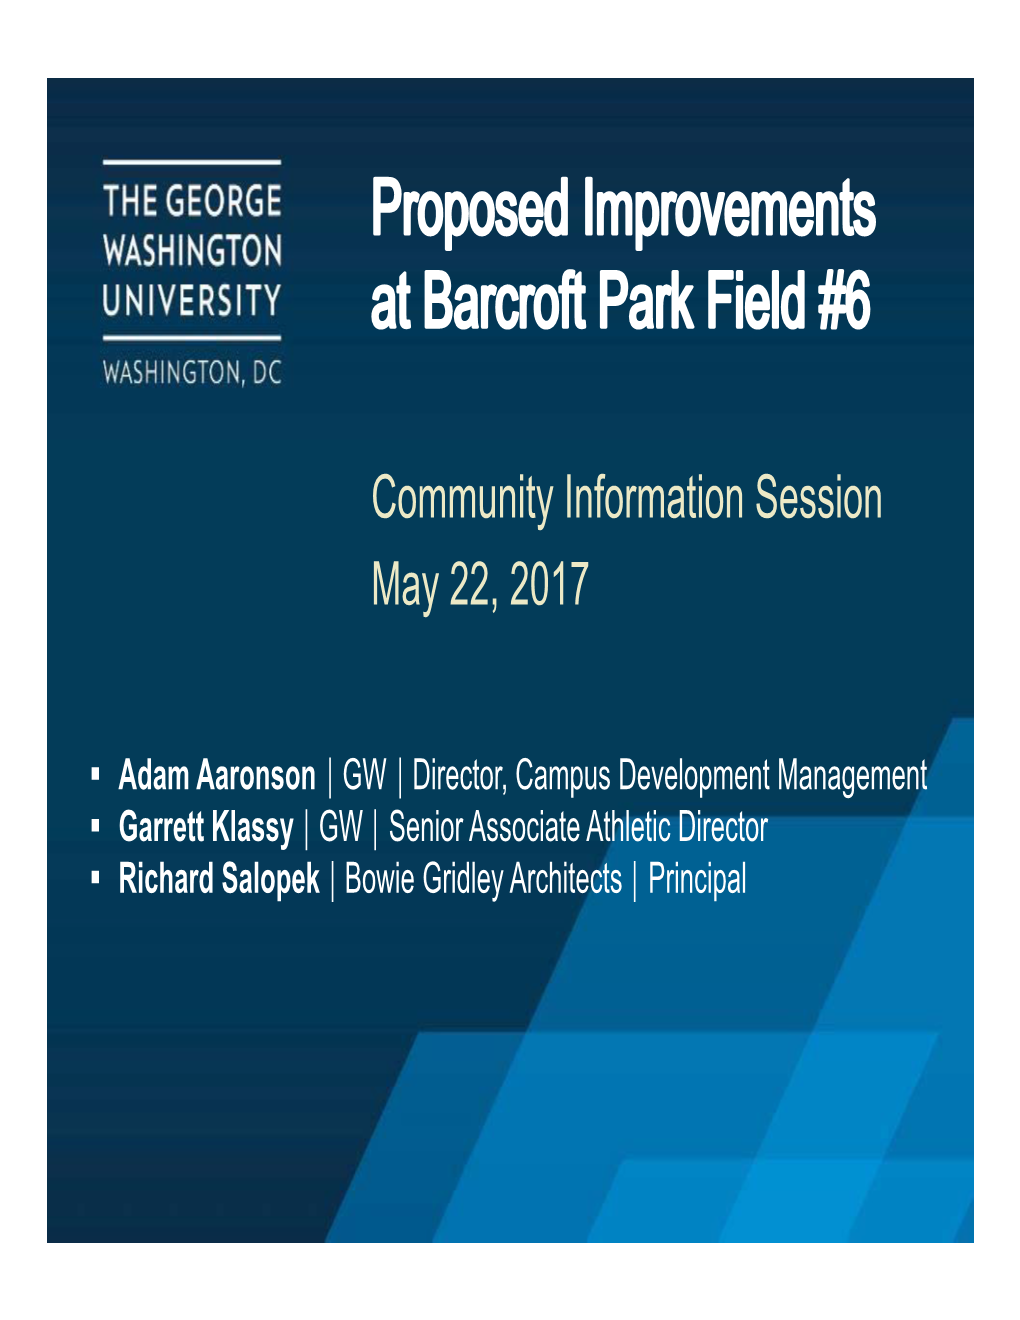 Community Information Session May 22, 2017